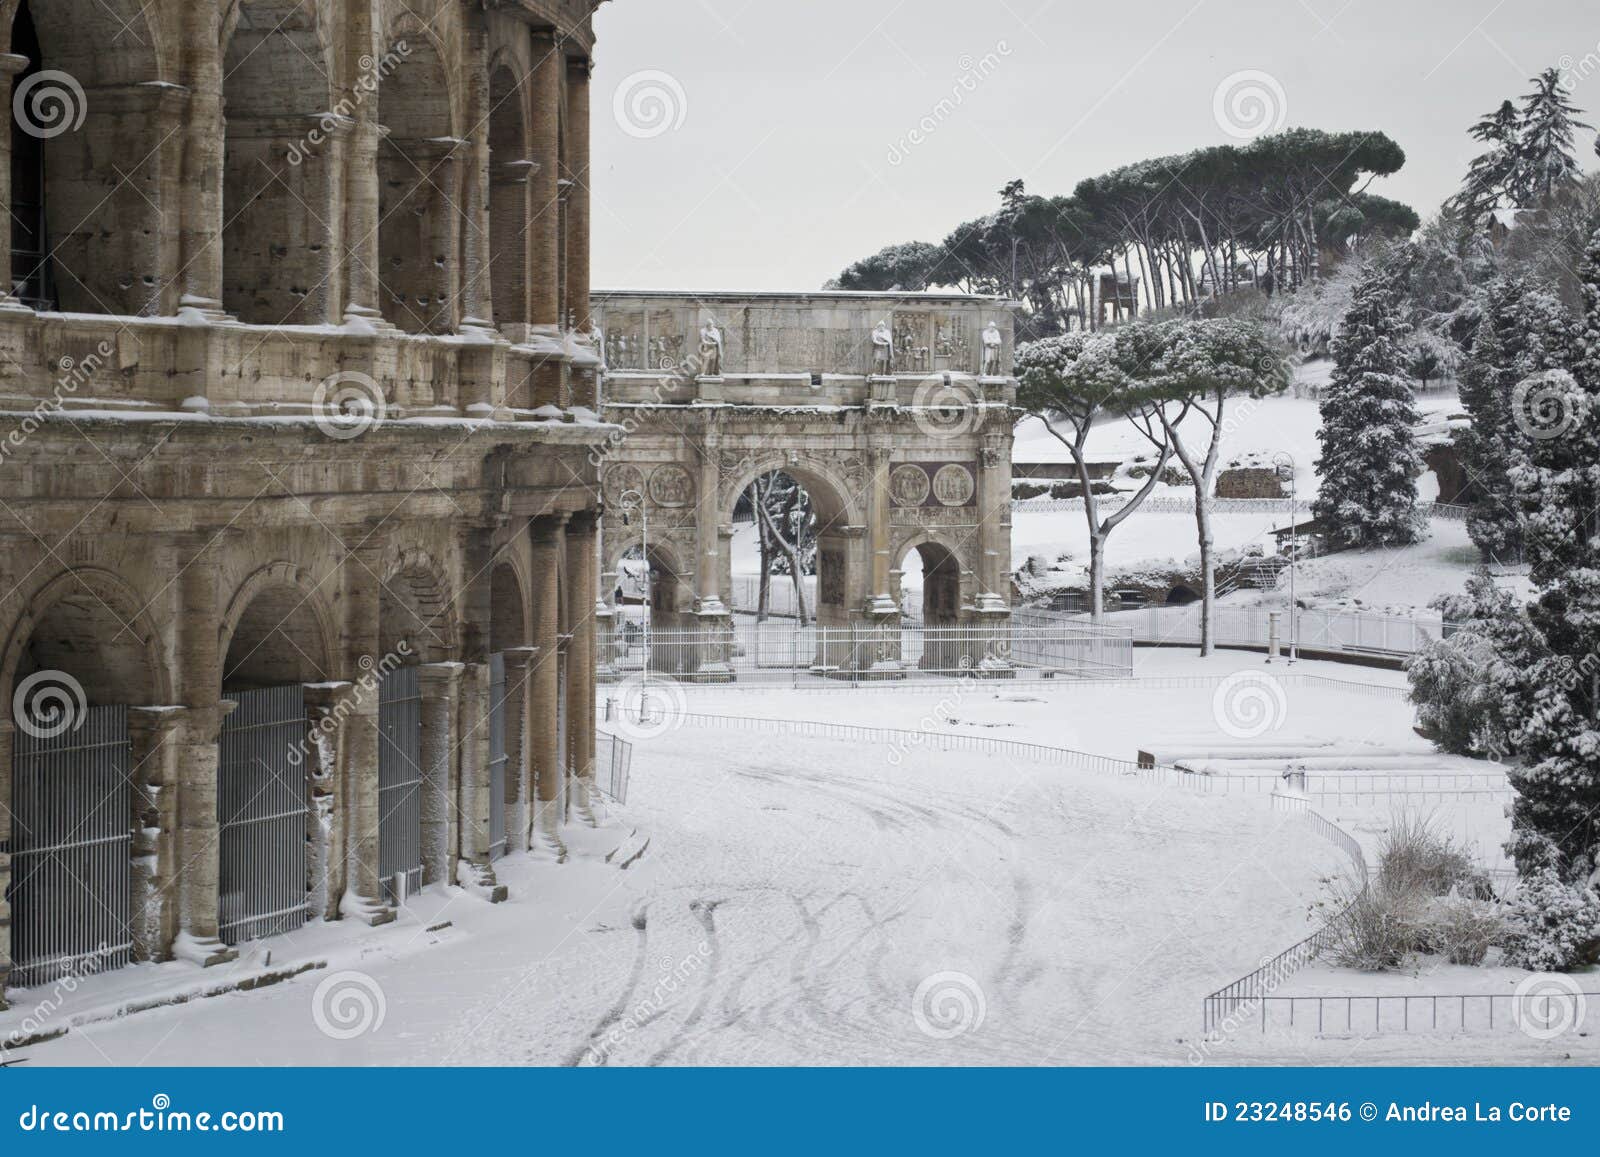 colosseum and costantine's arch in the snow